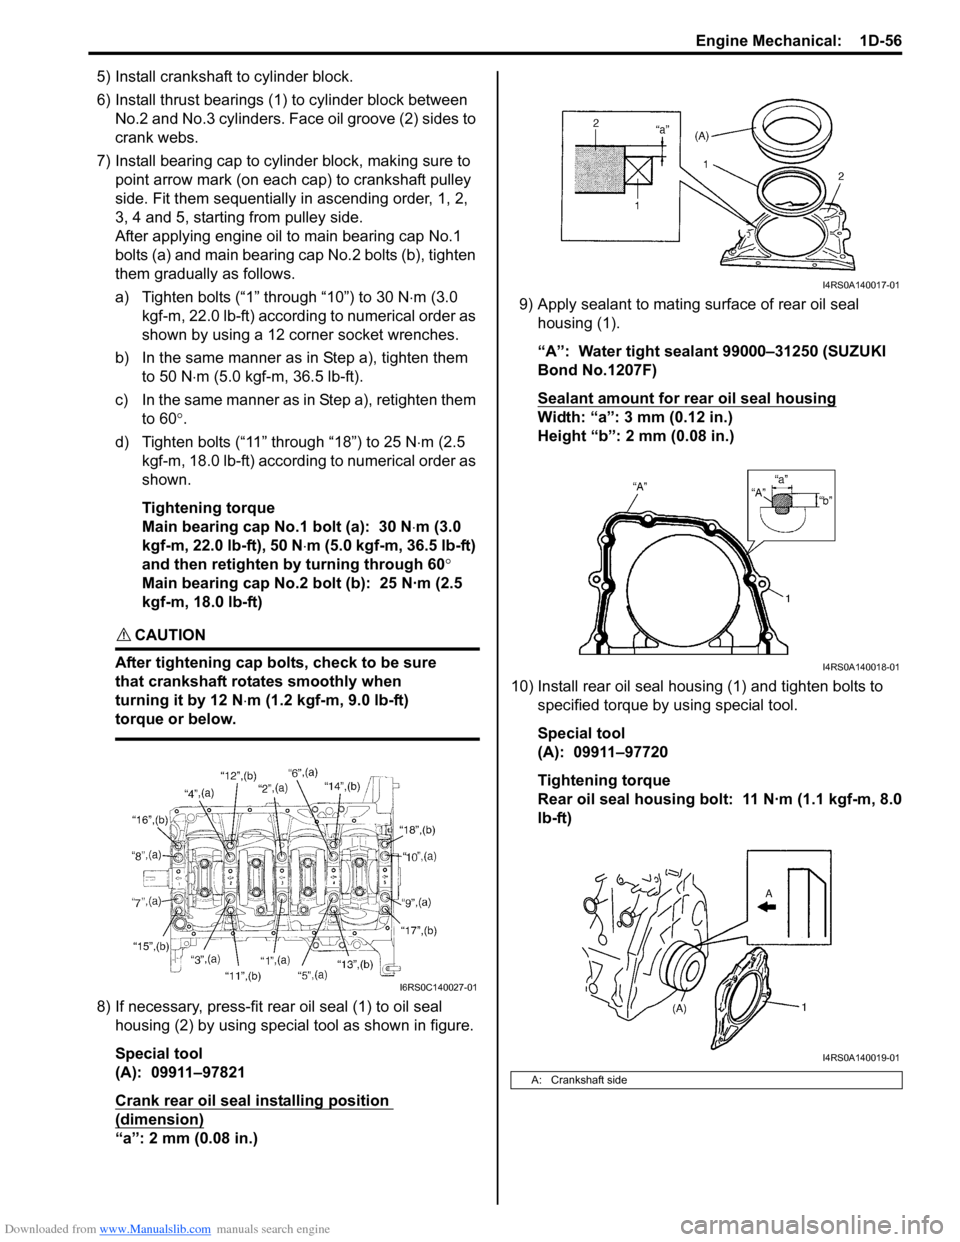 SUZUKI SWIFT 2008 2.G Service Workshop Manual Downloaded from www.Manualslib.com manuals search engine Engine Mechanical:  1D-56
5) Install crankshaft to cylinder block.
6) Install thrust bearings (1) to cylinder block between No.2 and No.3 cylin